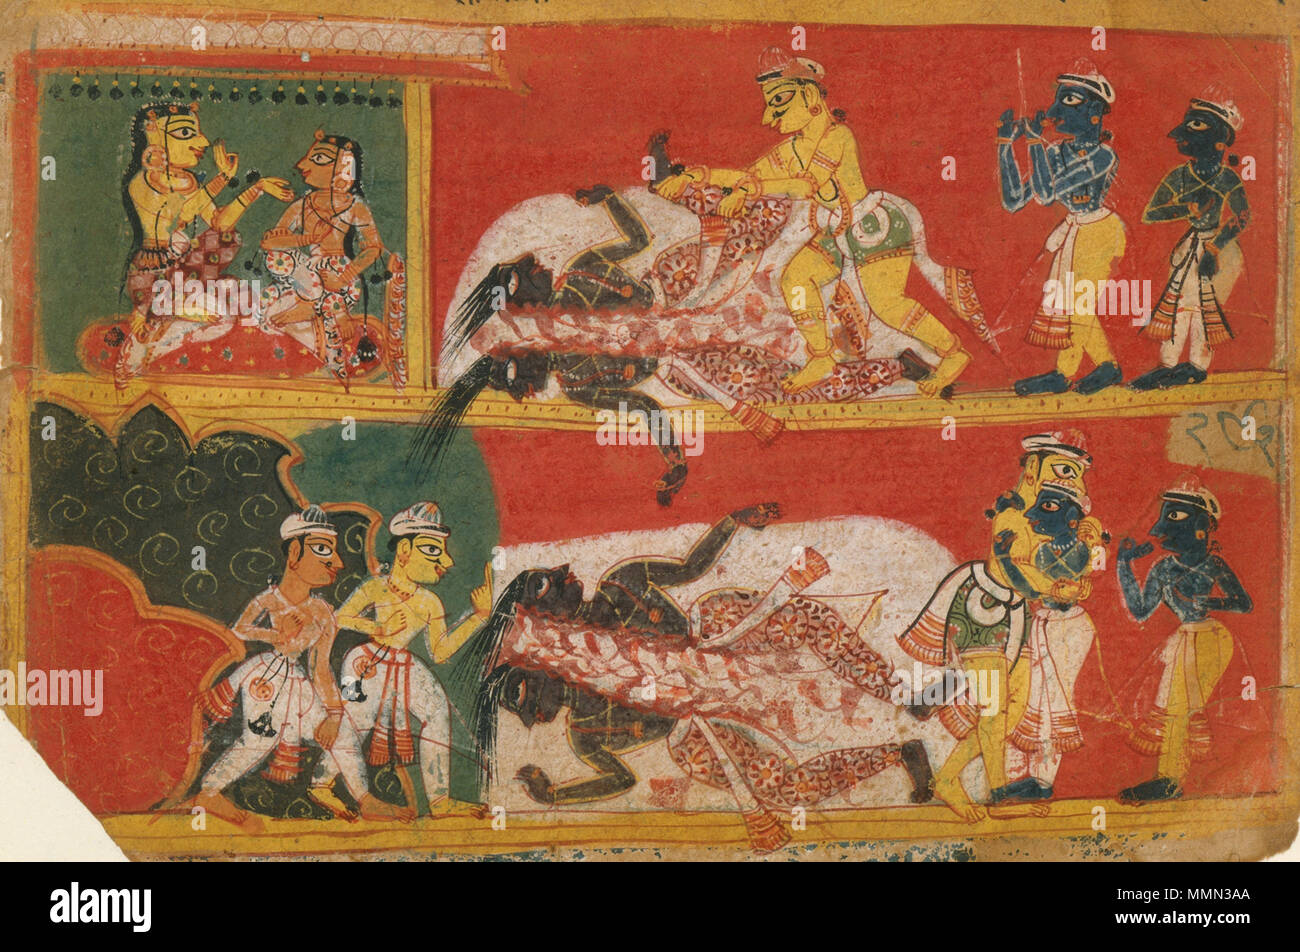 . English: Bhima Slays Jarasandha: Page from a Dispersed Bhagavata Purana Manuscript Date:  ca. 1520–40 Culture:  India (Delhi Agra area) Medium:  Ink and opaque watercolor on paper Dimensions:  6 3/4 x 9 1/16 in. (17.1 x 23 cm) Classification:  Painting Credit Line:  Gift of Cynthia Hazen Polsky, 1985 Accession Number:  1985.398.16   Description Jarasandha, the mighty and evil ruler of Magadha, had imprisoned ninety-five kings, but he could not be defeated, as he was an invincible general and, because of a boon from the gods, could not be harmed by weapons. To bring about his downfall, Krishn Stock Photo